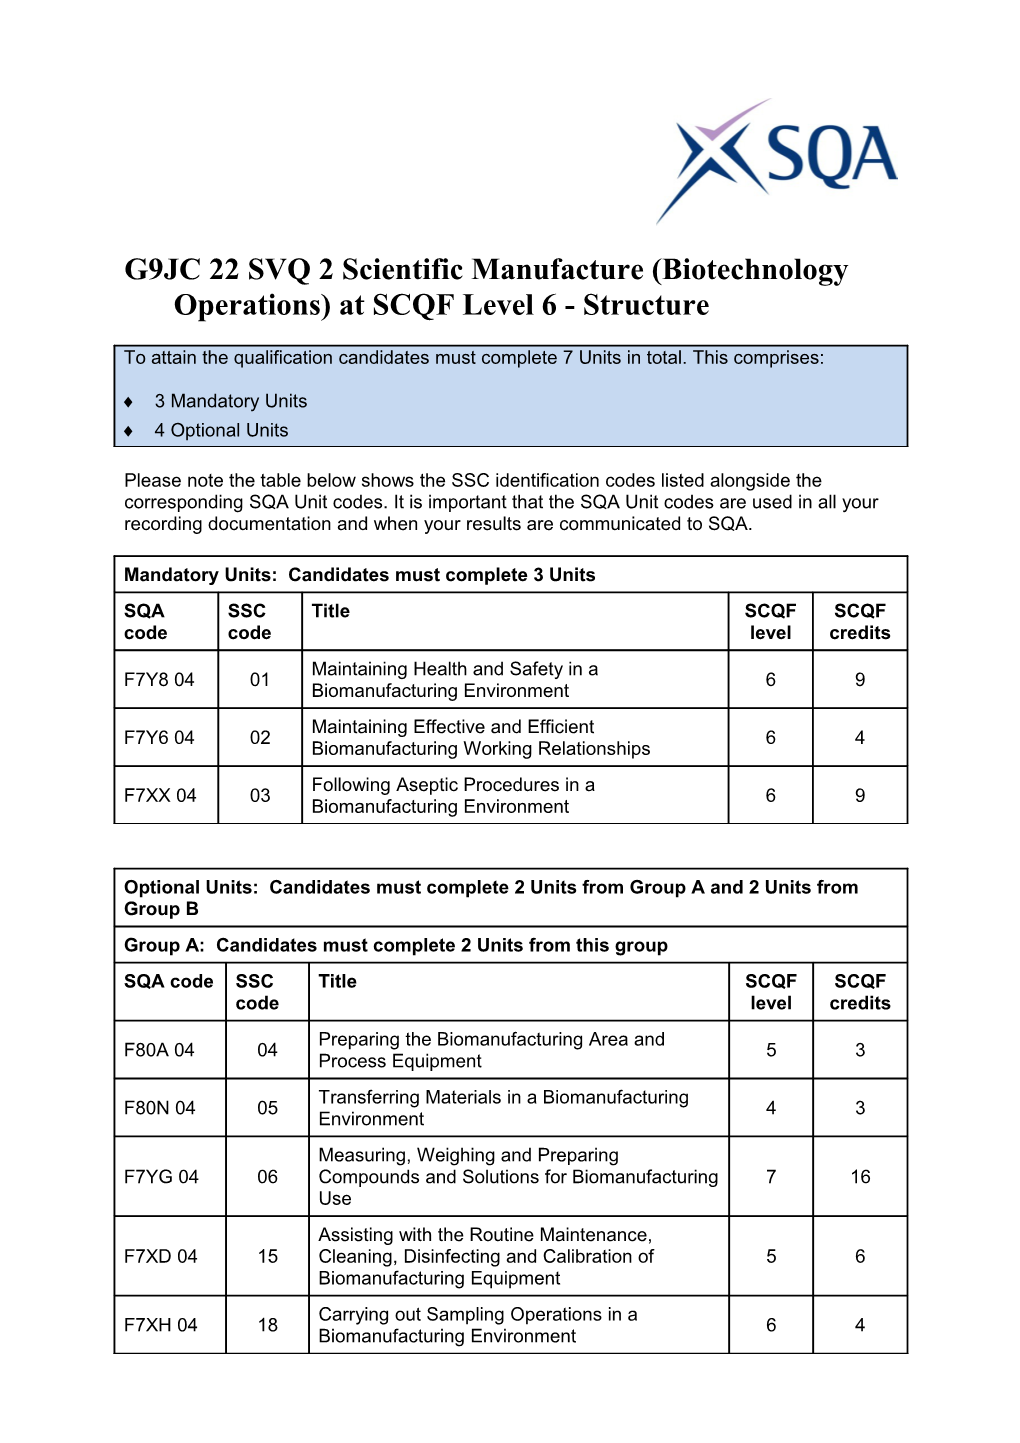 G9JC 22 SVQ 2 Scientific Manufacture (Biotechnology Operations) at SCQF Level 6 - Structure